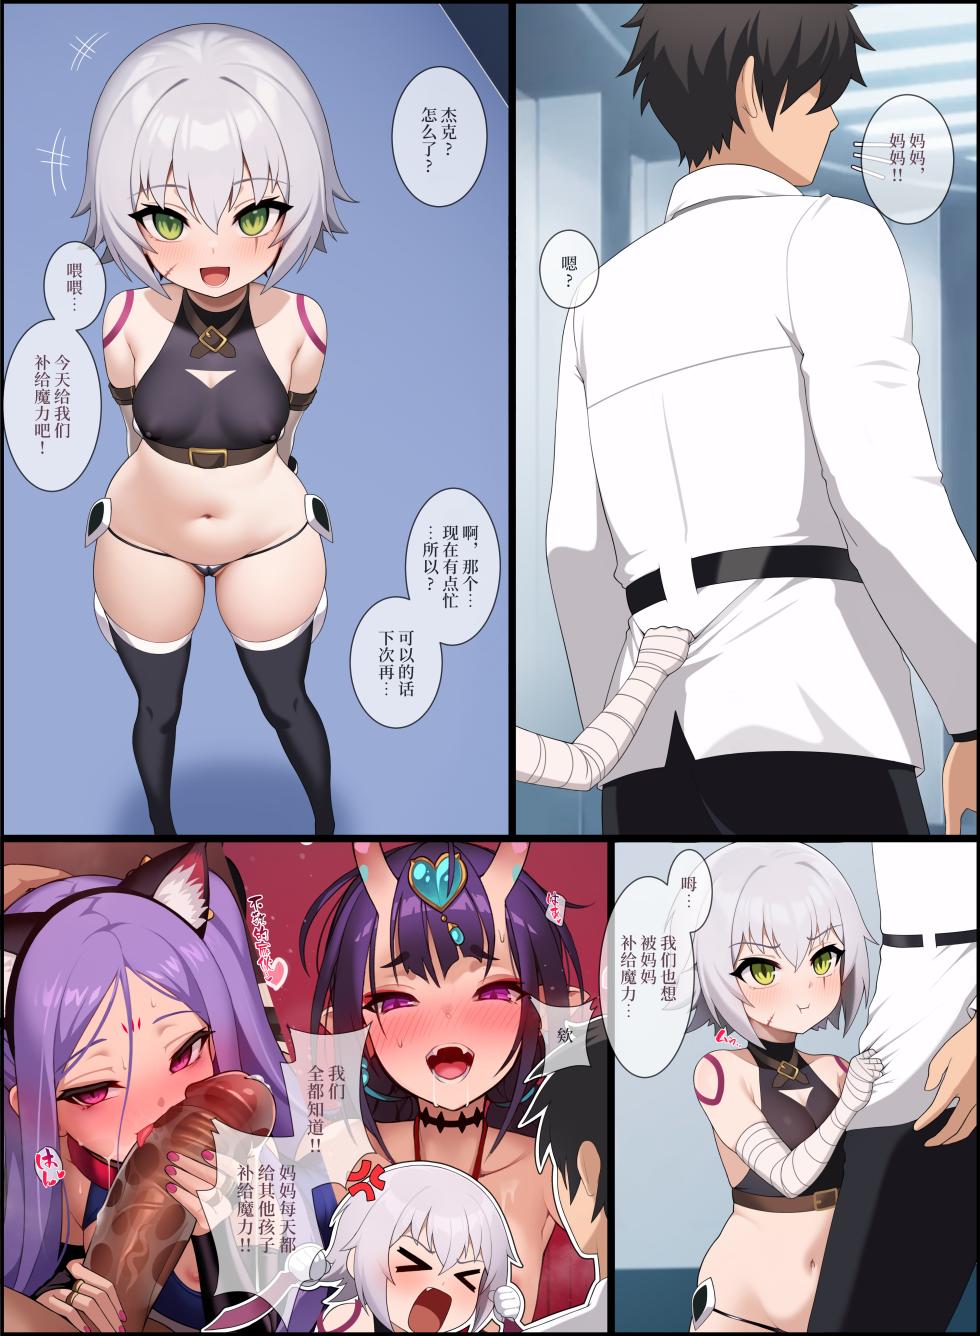 [Pergrim] Jack (Fate/Grand Order) [Chinese] [不咕鸟汉化组] - Page 1